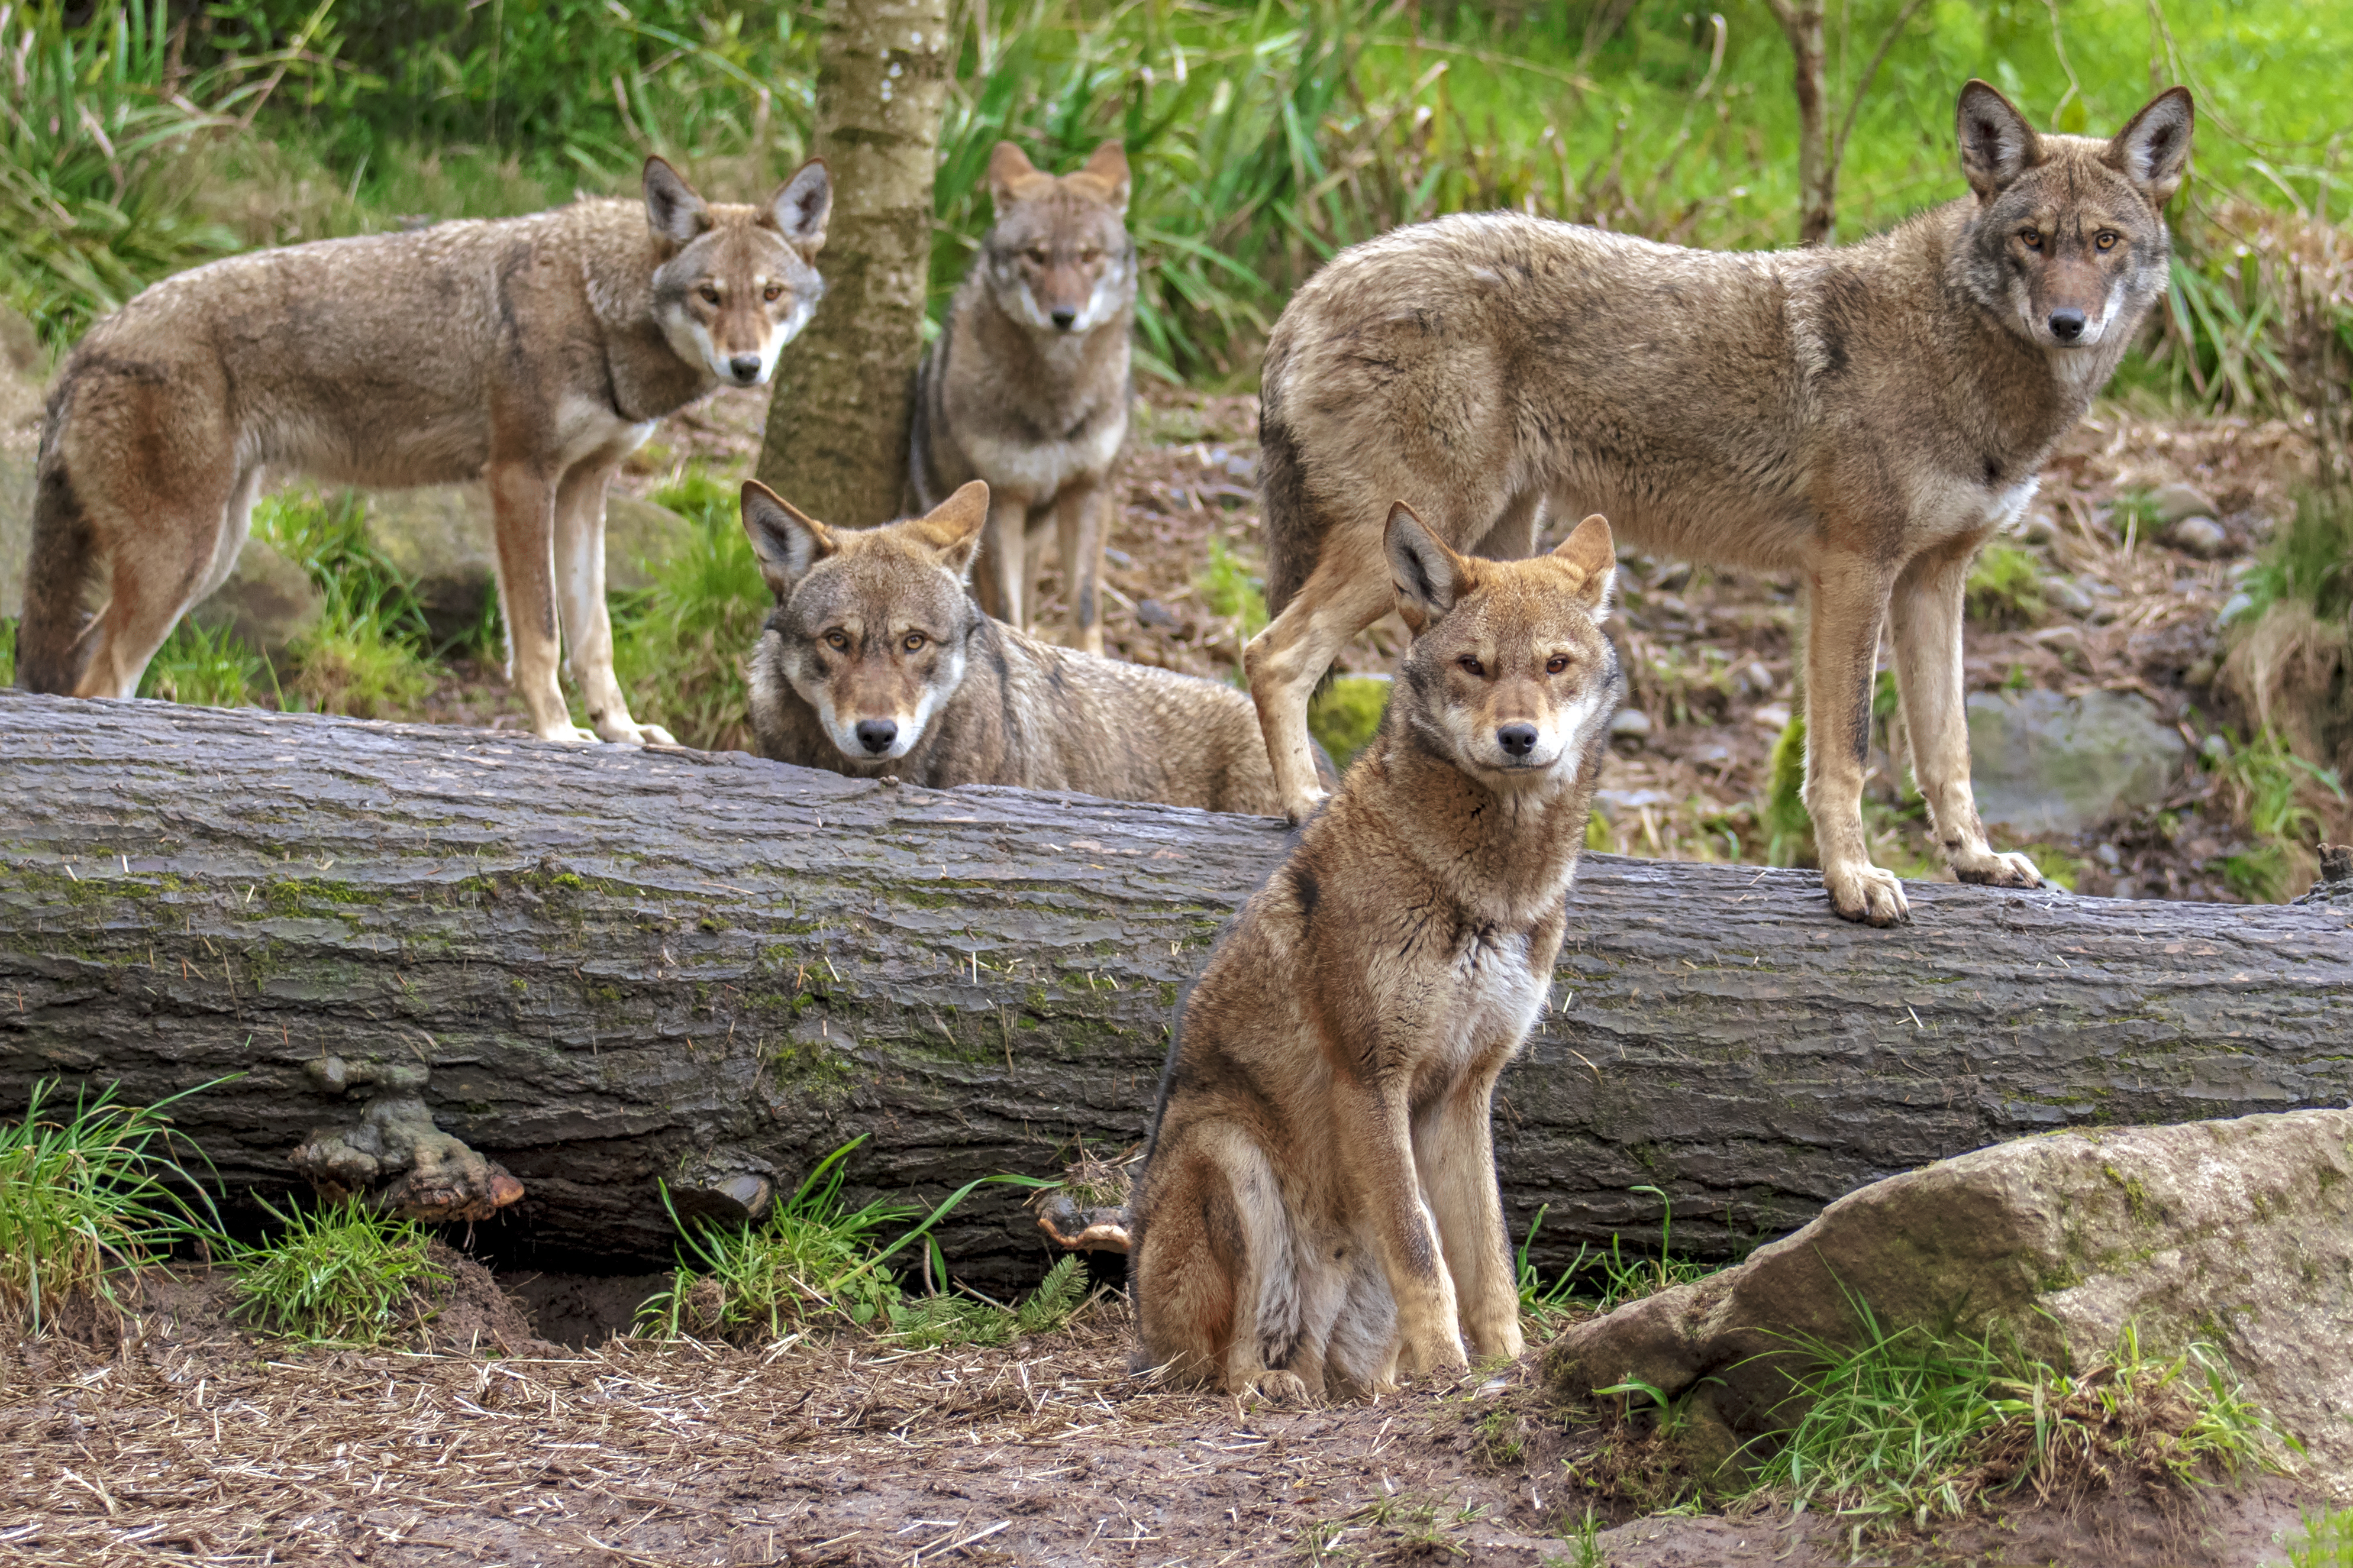 Family pack of five red wolves standing or sitting around a fallen tree, all looking toward the lens making a family portrait .The wolves in front are in focus and the wolves further behind softer in focus